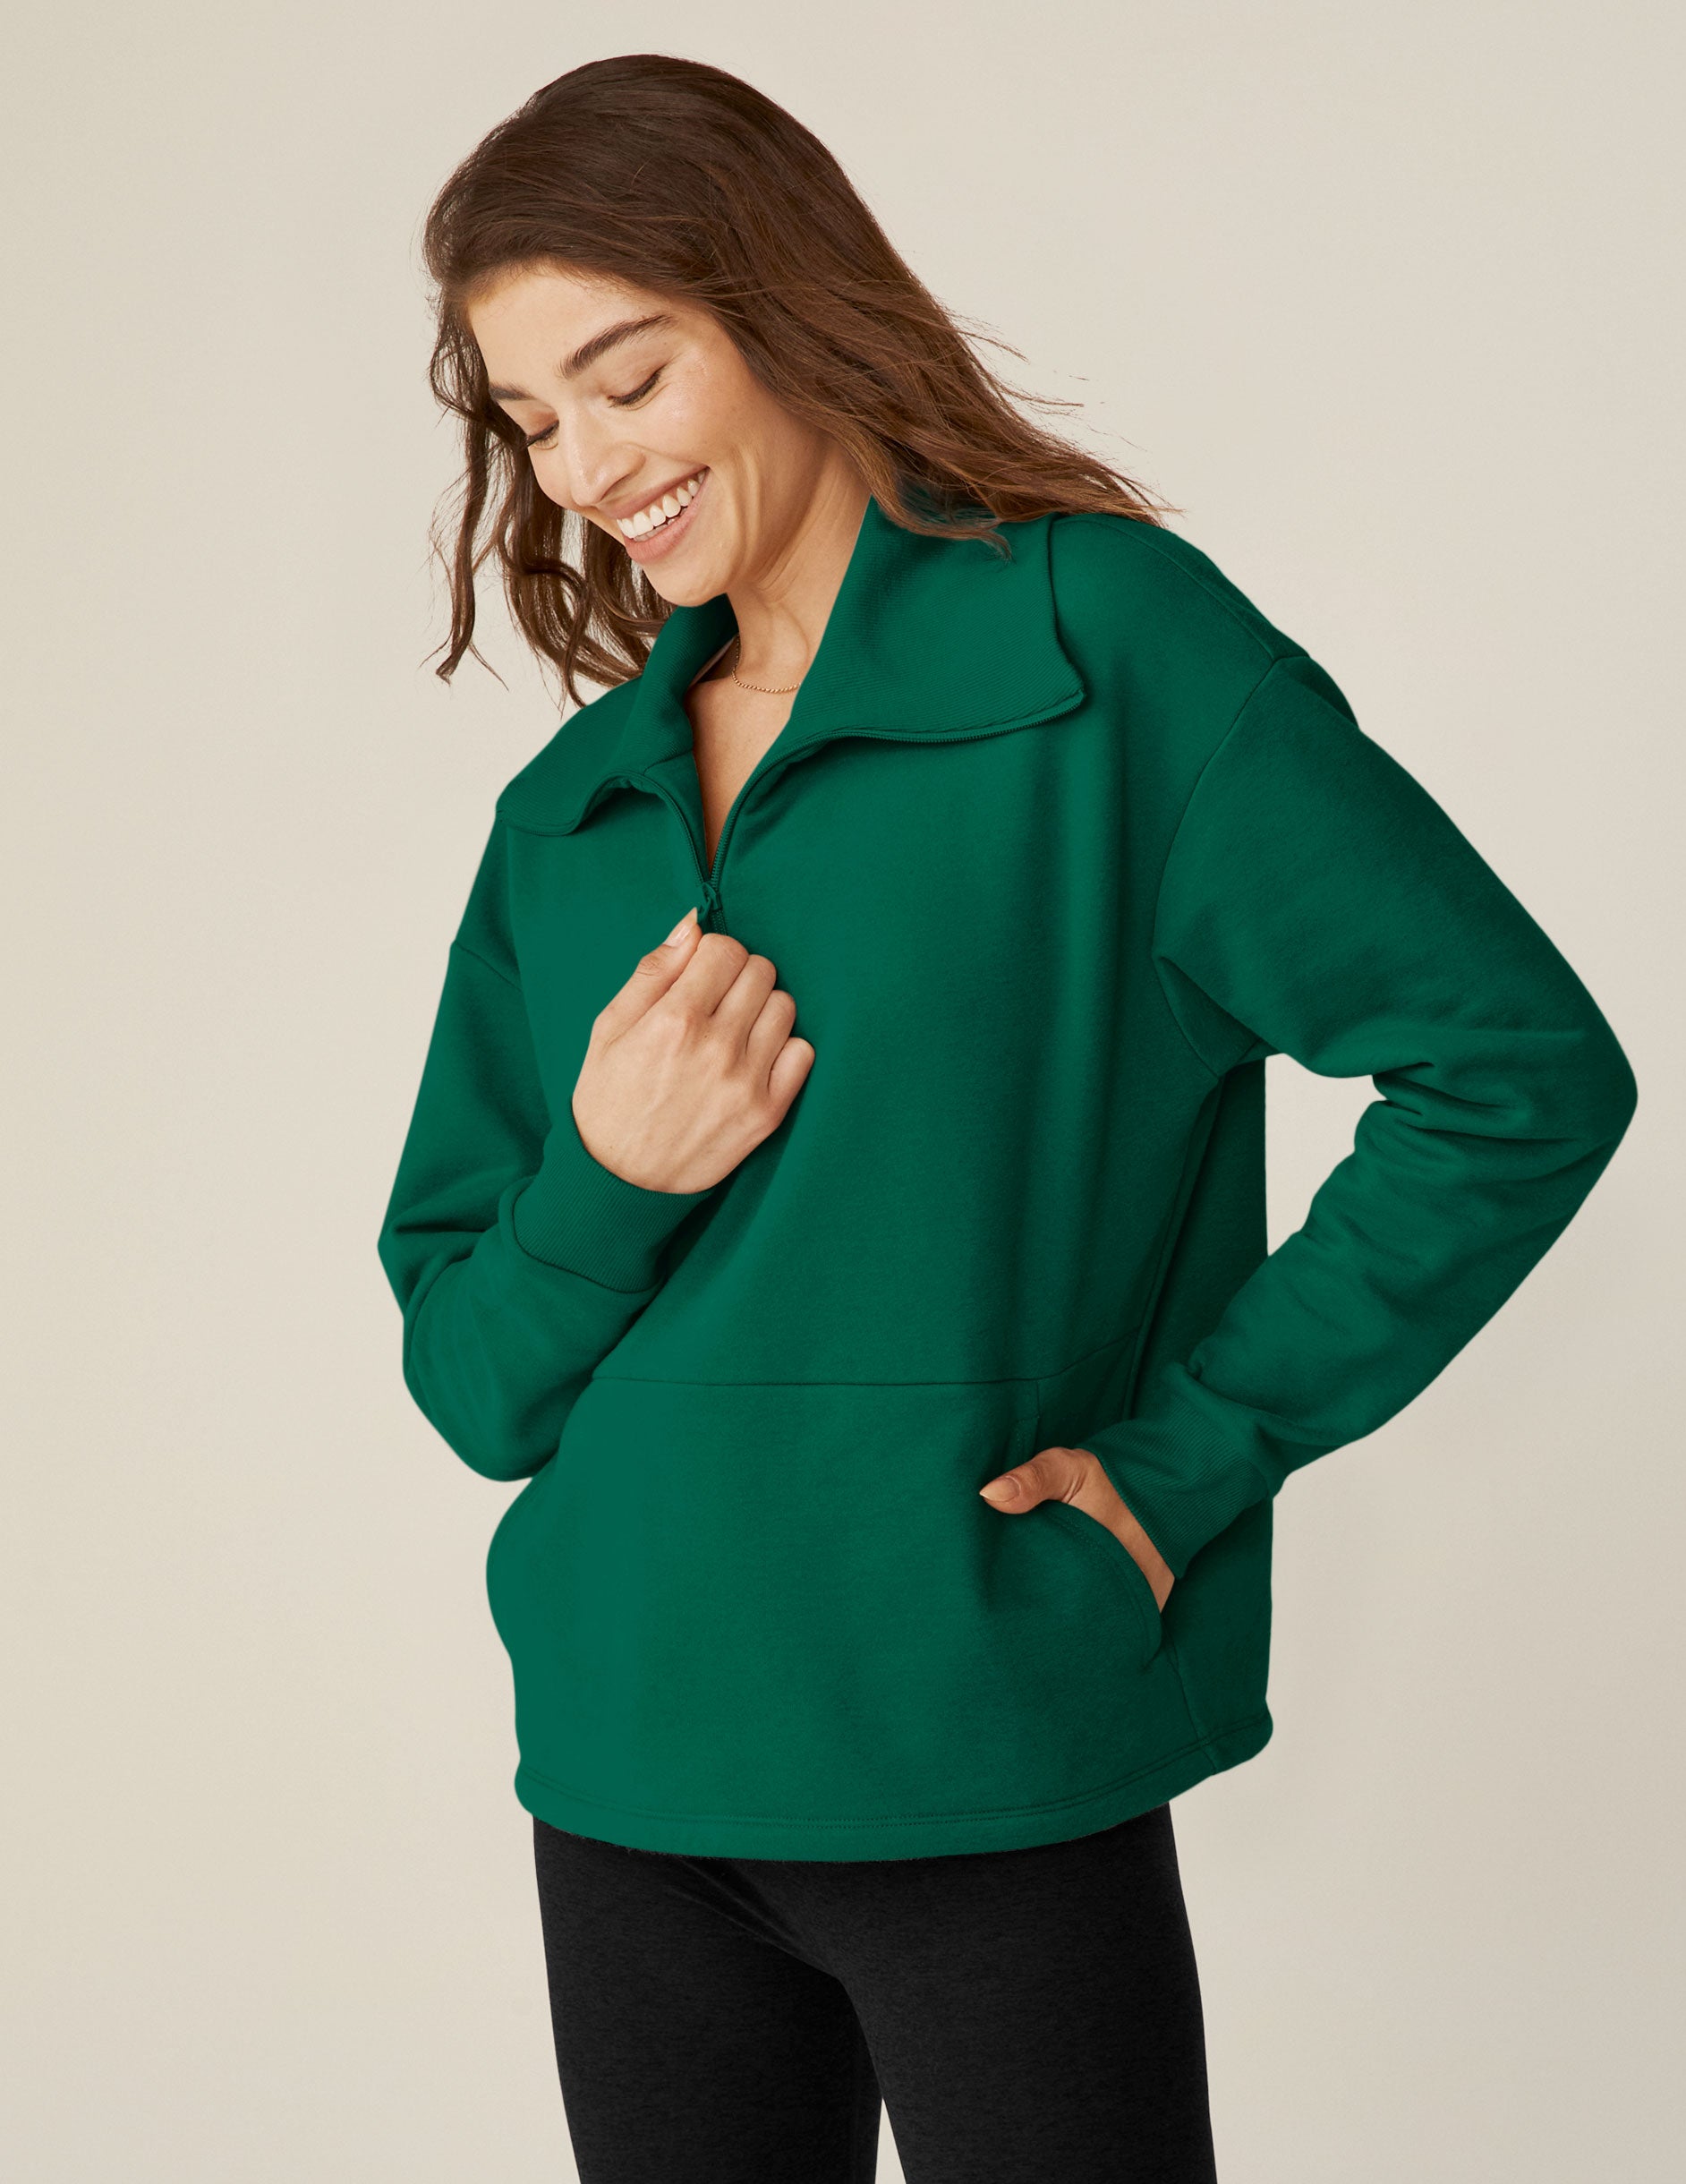 green quarter zip pullover jacket with a kangaroo pouch.